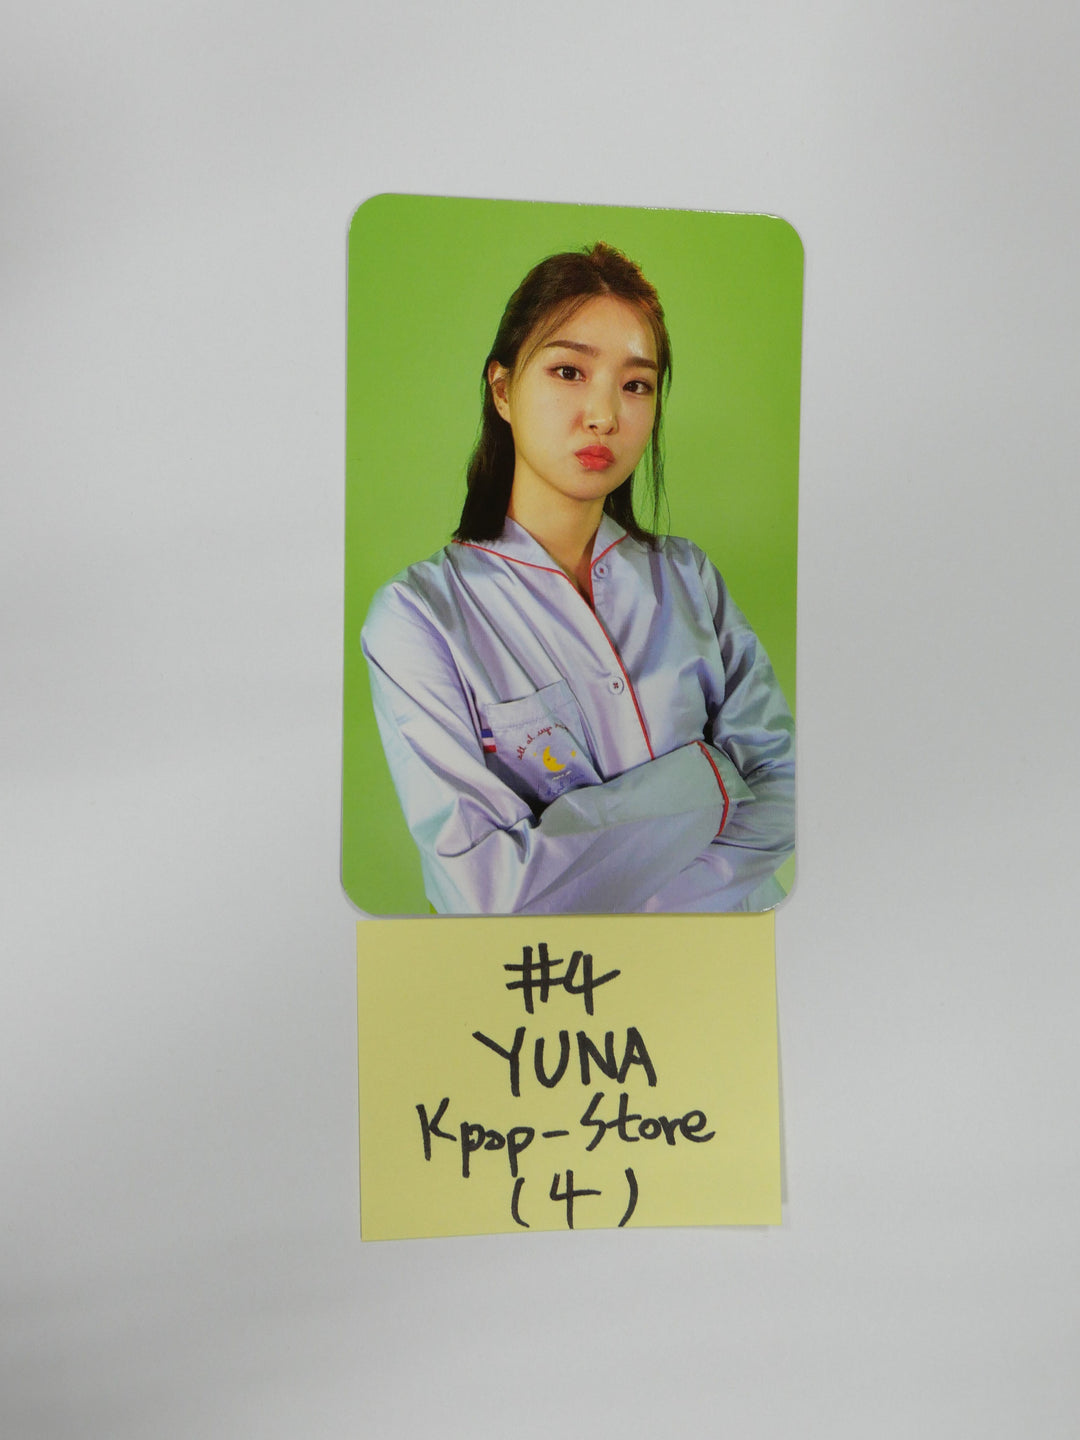 Brave Girls ‘After We Ride’- Kpop Store Fan Sign Event Photocard